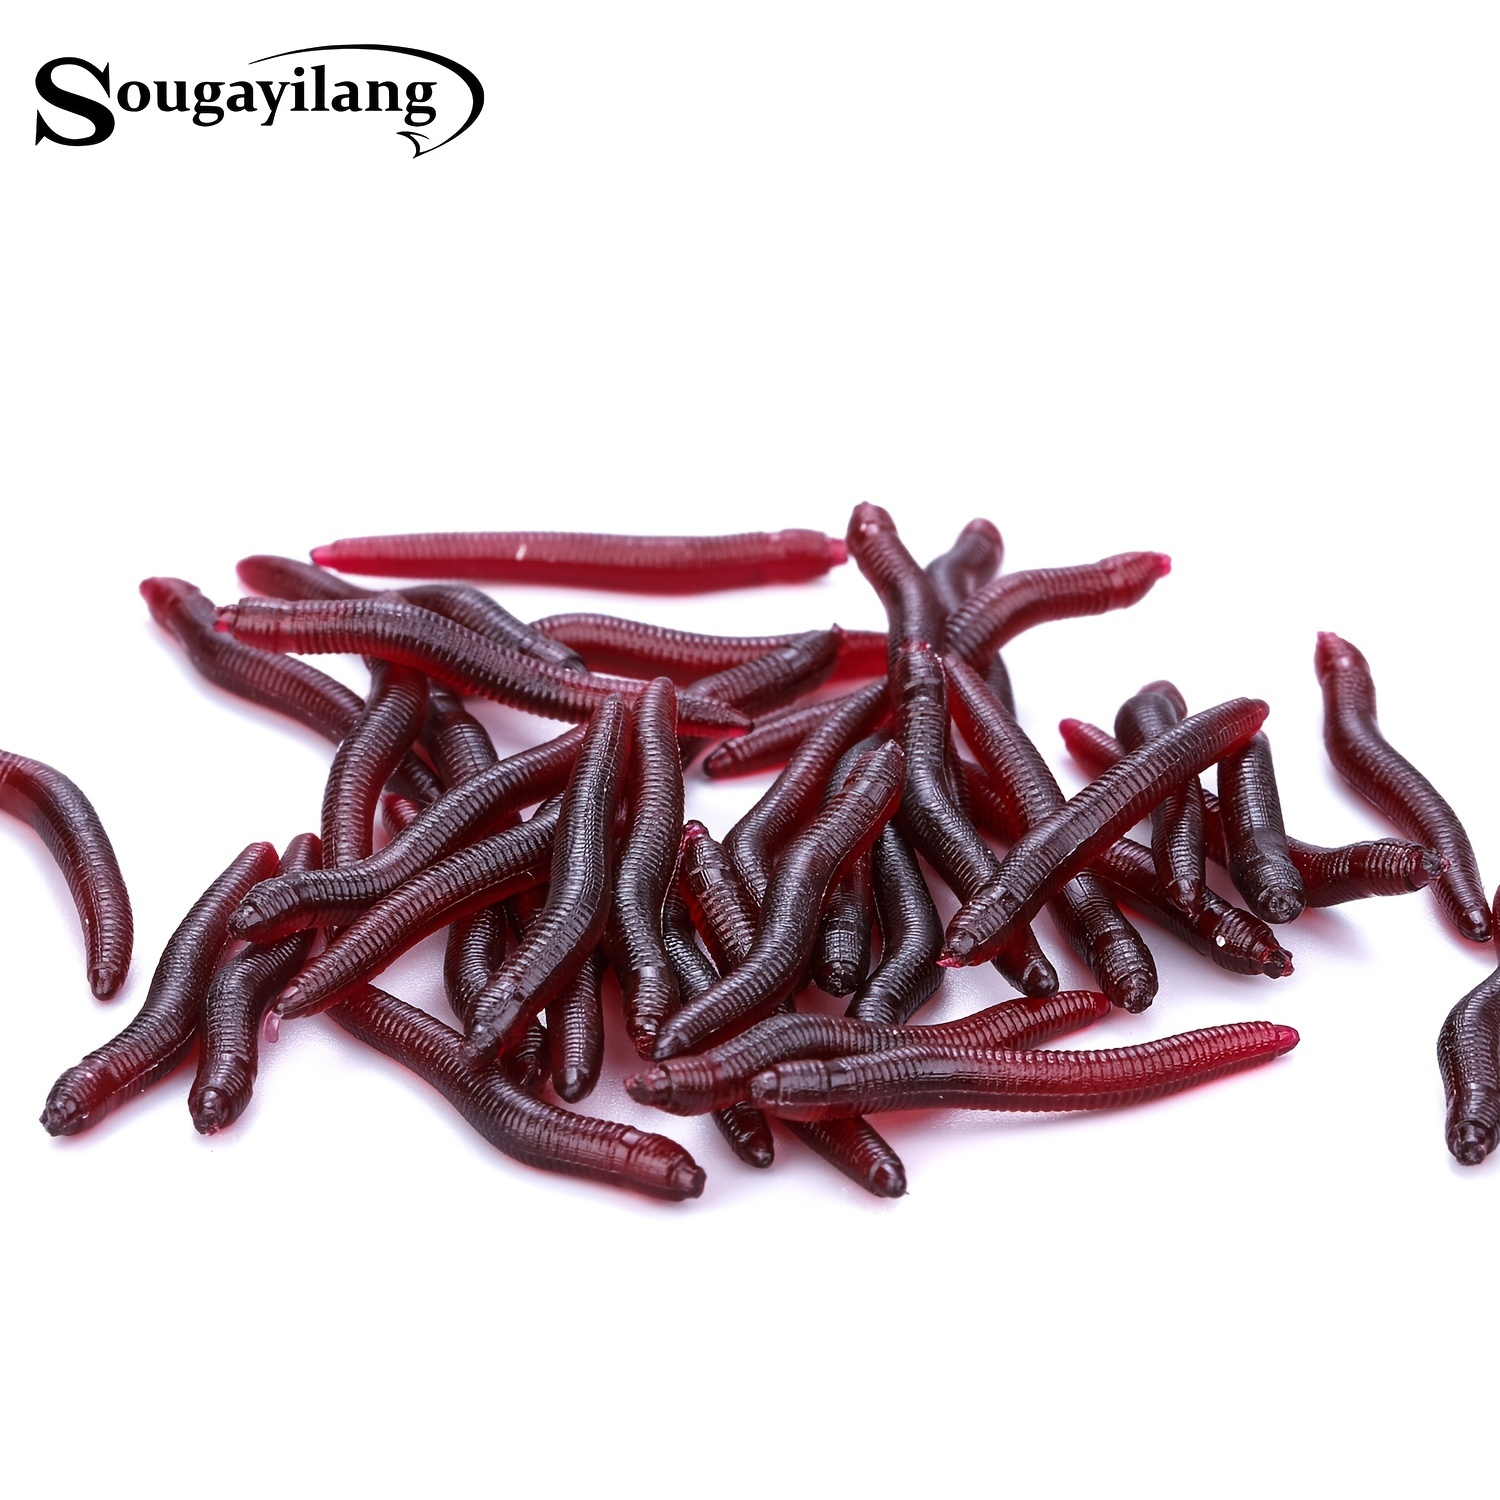 100pcs Earthworm Soft Lures - 4cm/1.2in 0.3g Red Worms - Artificial Rubber  Lifelike Baits with Fishy Smell - 100pcs Sougayilang Tackle